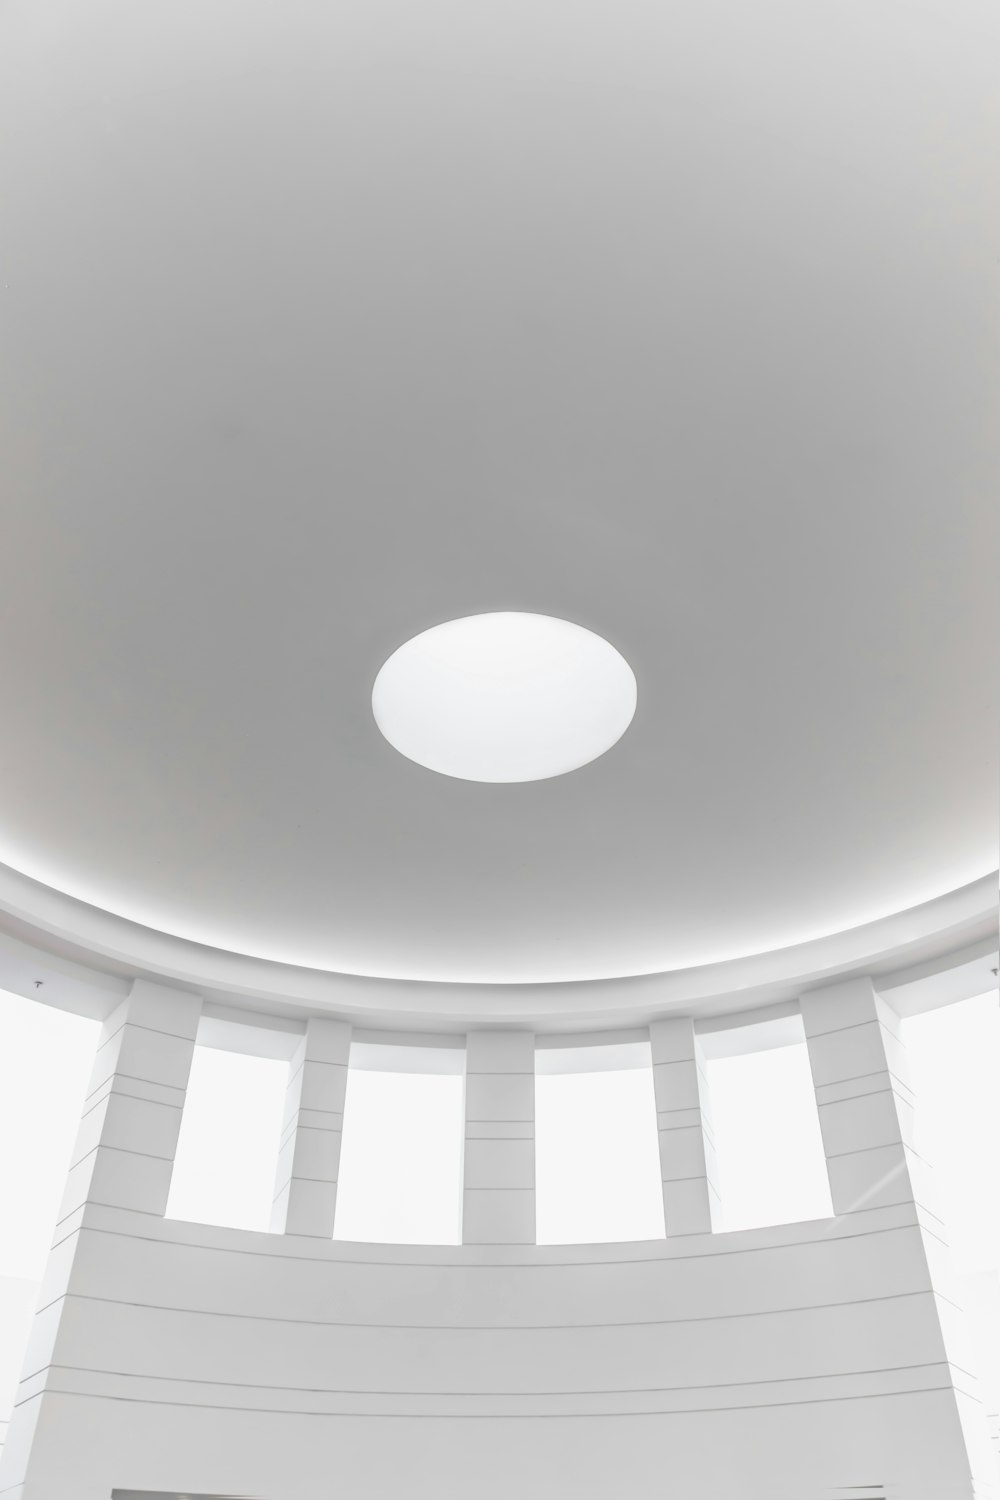 white round ceiling with white ceiling